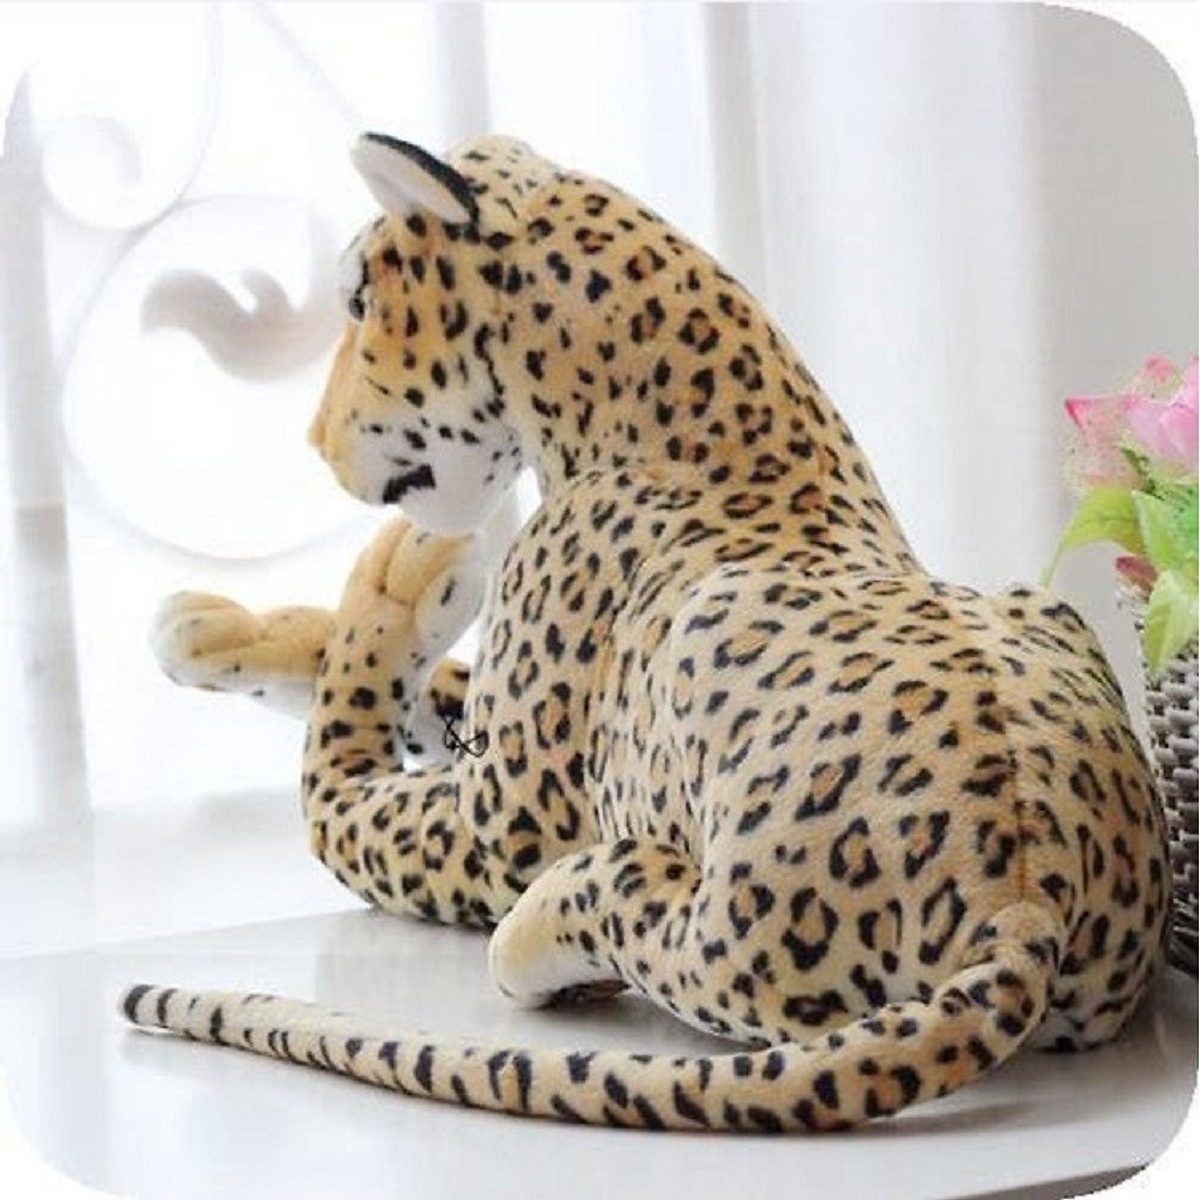 wildly-comfortable-our-top-5-cheetah-weighted-plush-toys